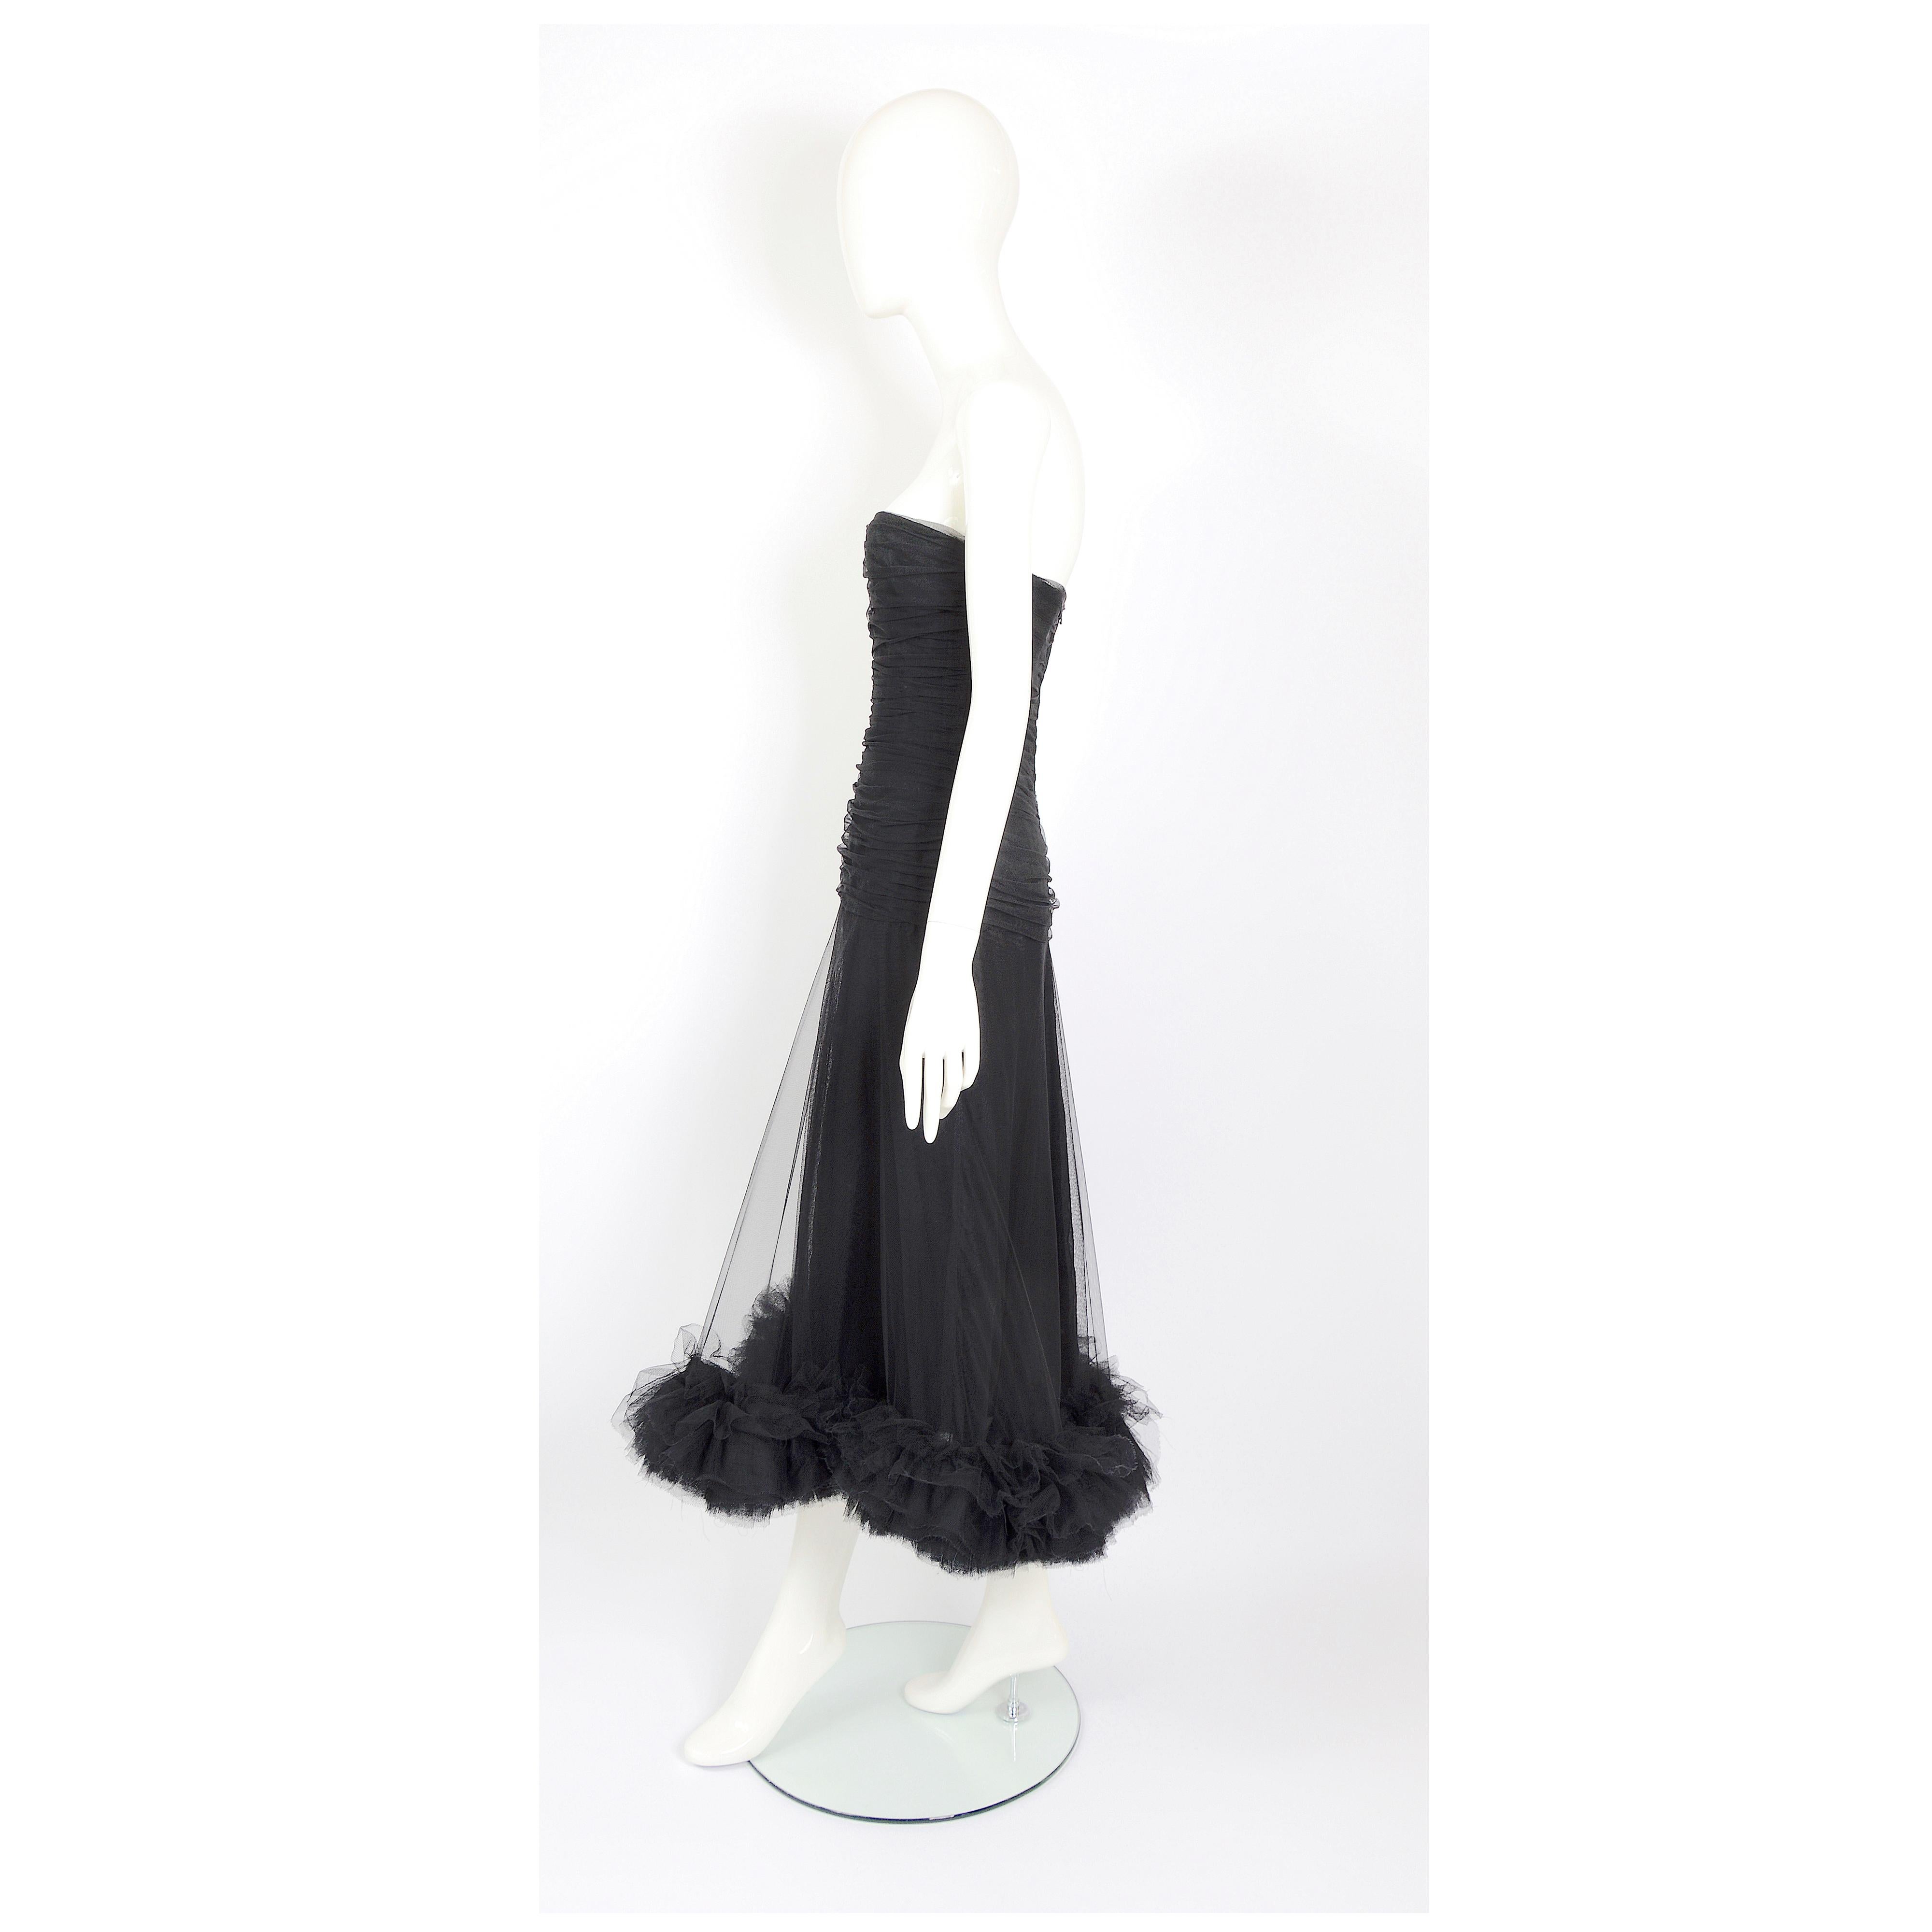 Christian Dior by Marc Bohan vintage numbered couture black tulle evening dress In Excellent Condition For Sale In Antwerp, BE